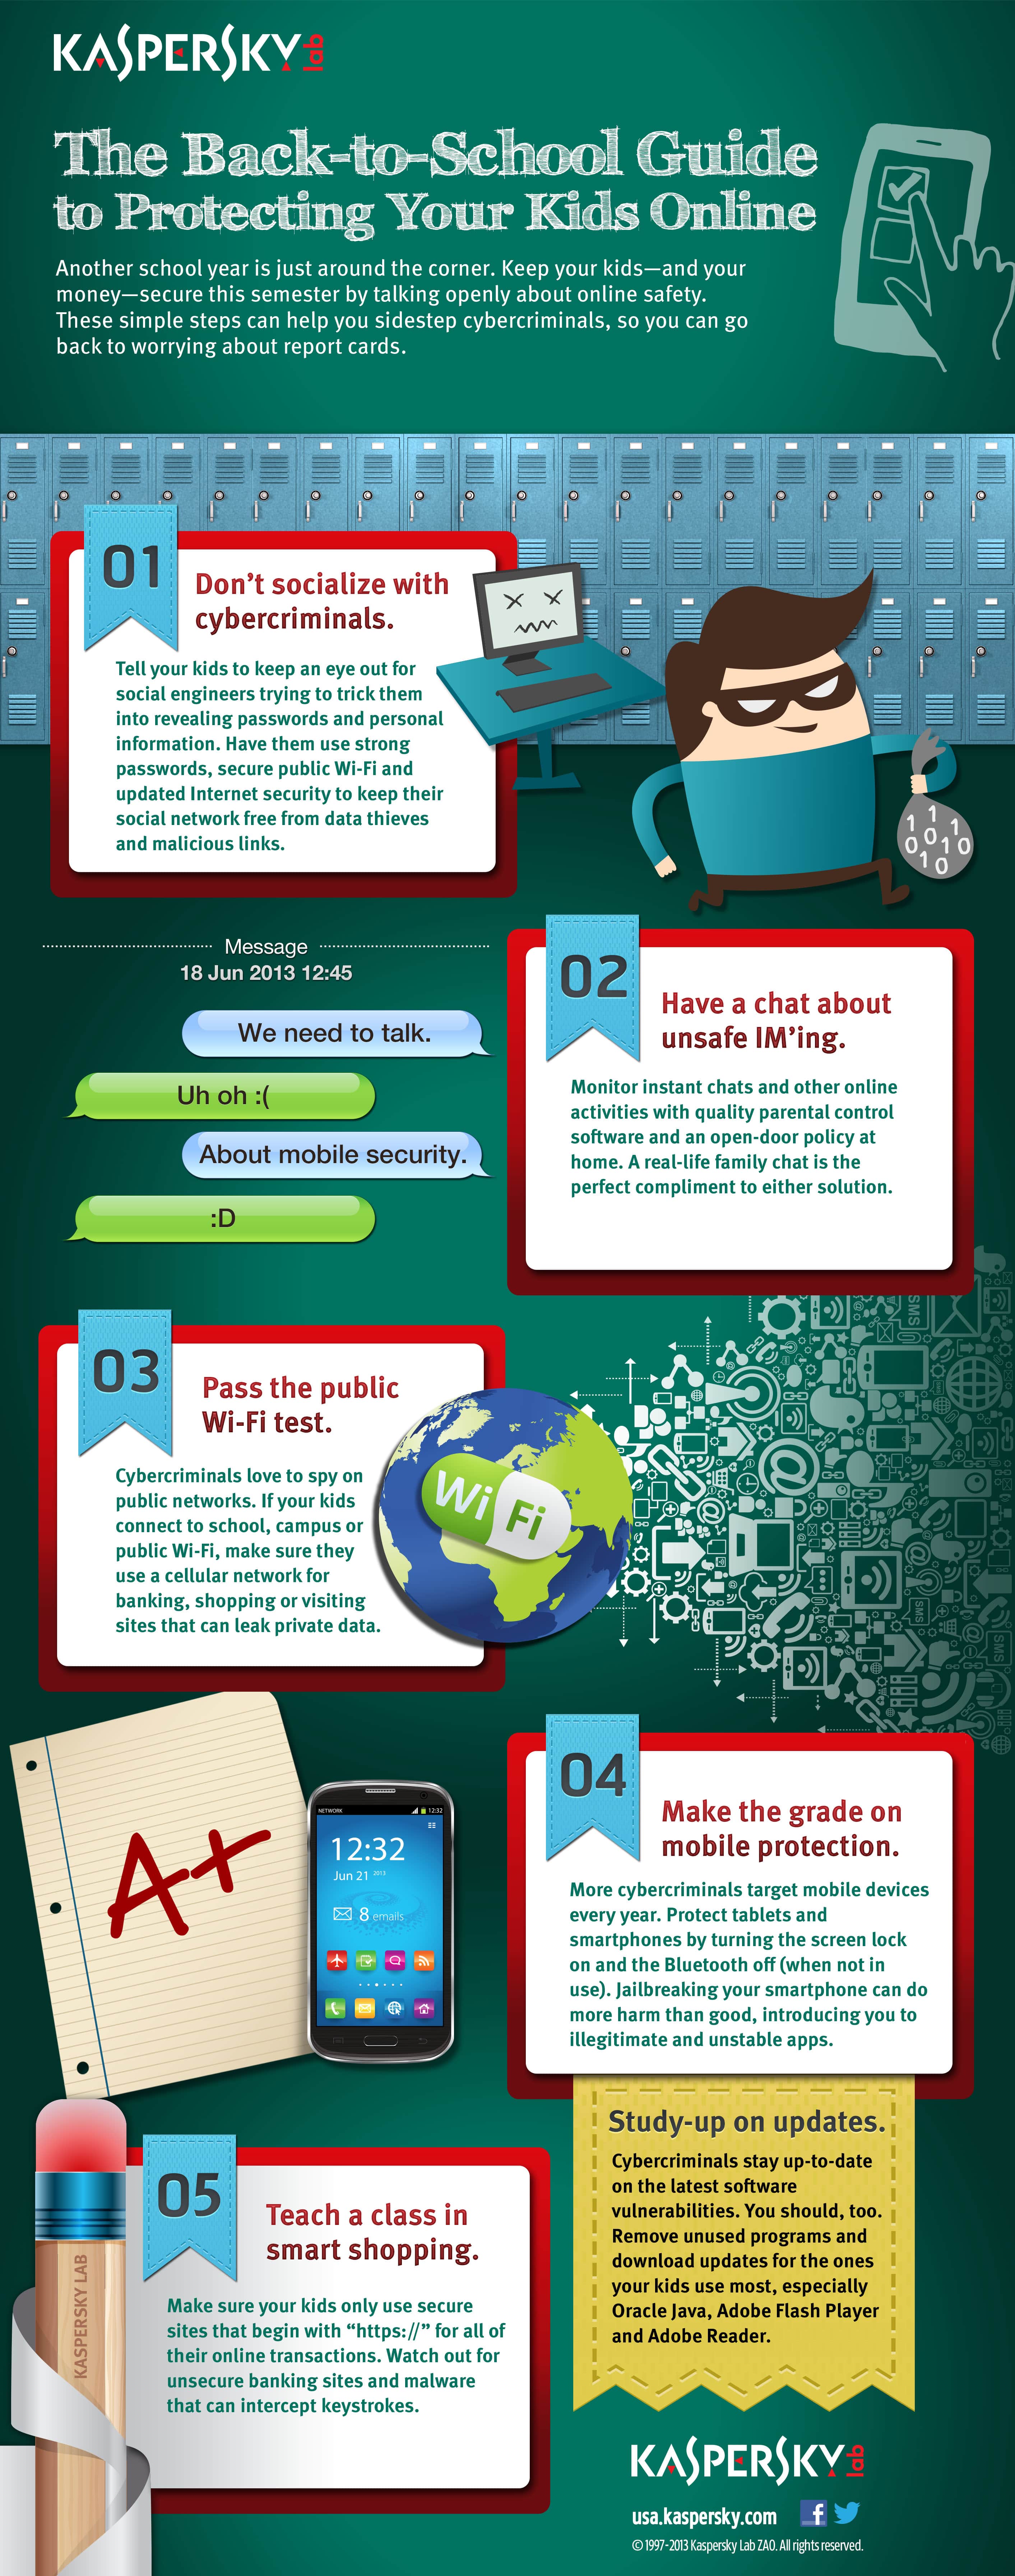 https://www.kaspersky.co.in/content/en-in/images/repository/isc/infographic-back-to-school-guide_0.jpg